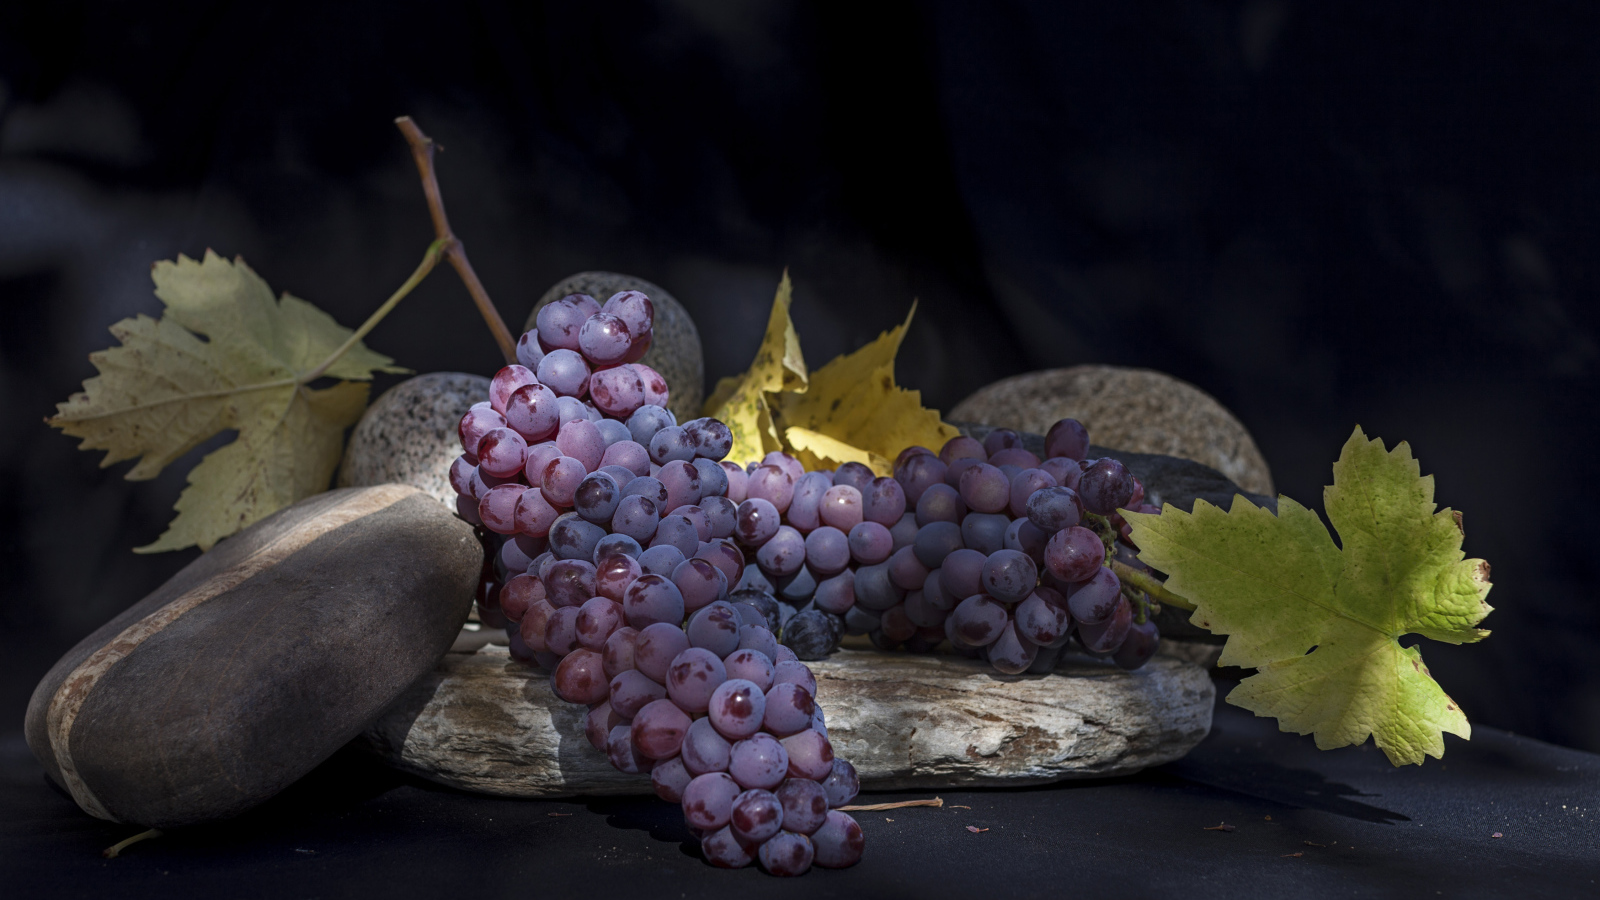 Large bunches of pink grapes with stones